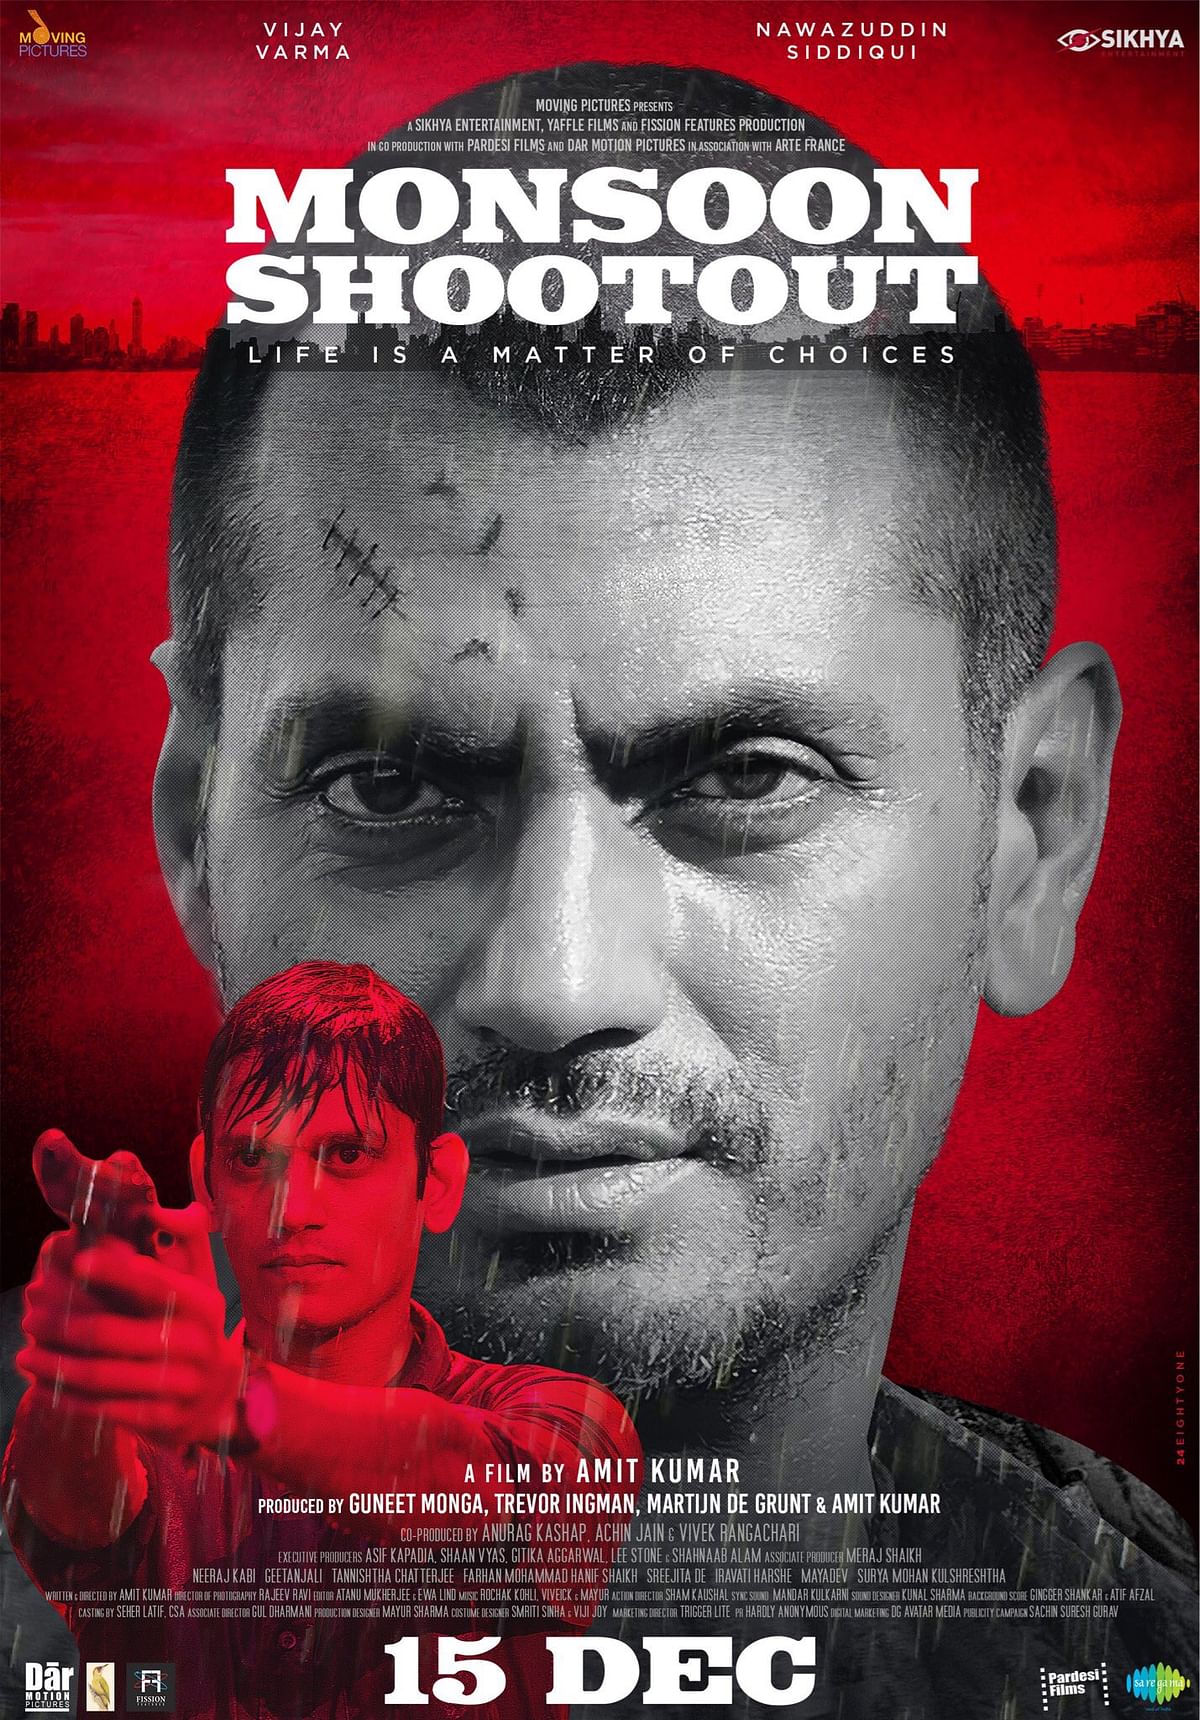 ‘Monsoon Shootout’ comes out with an interactive trailer, and other stories.